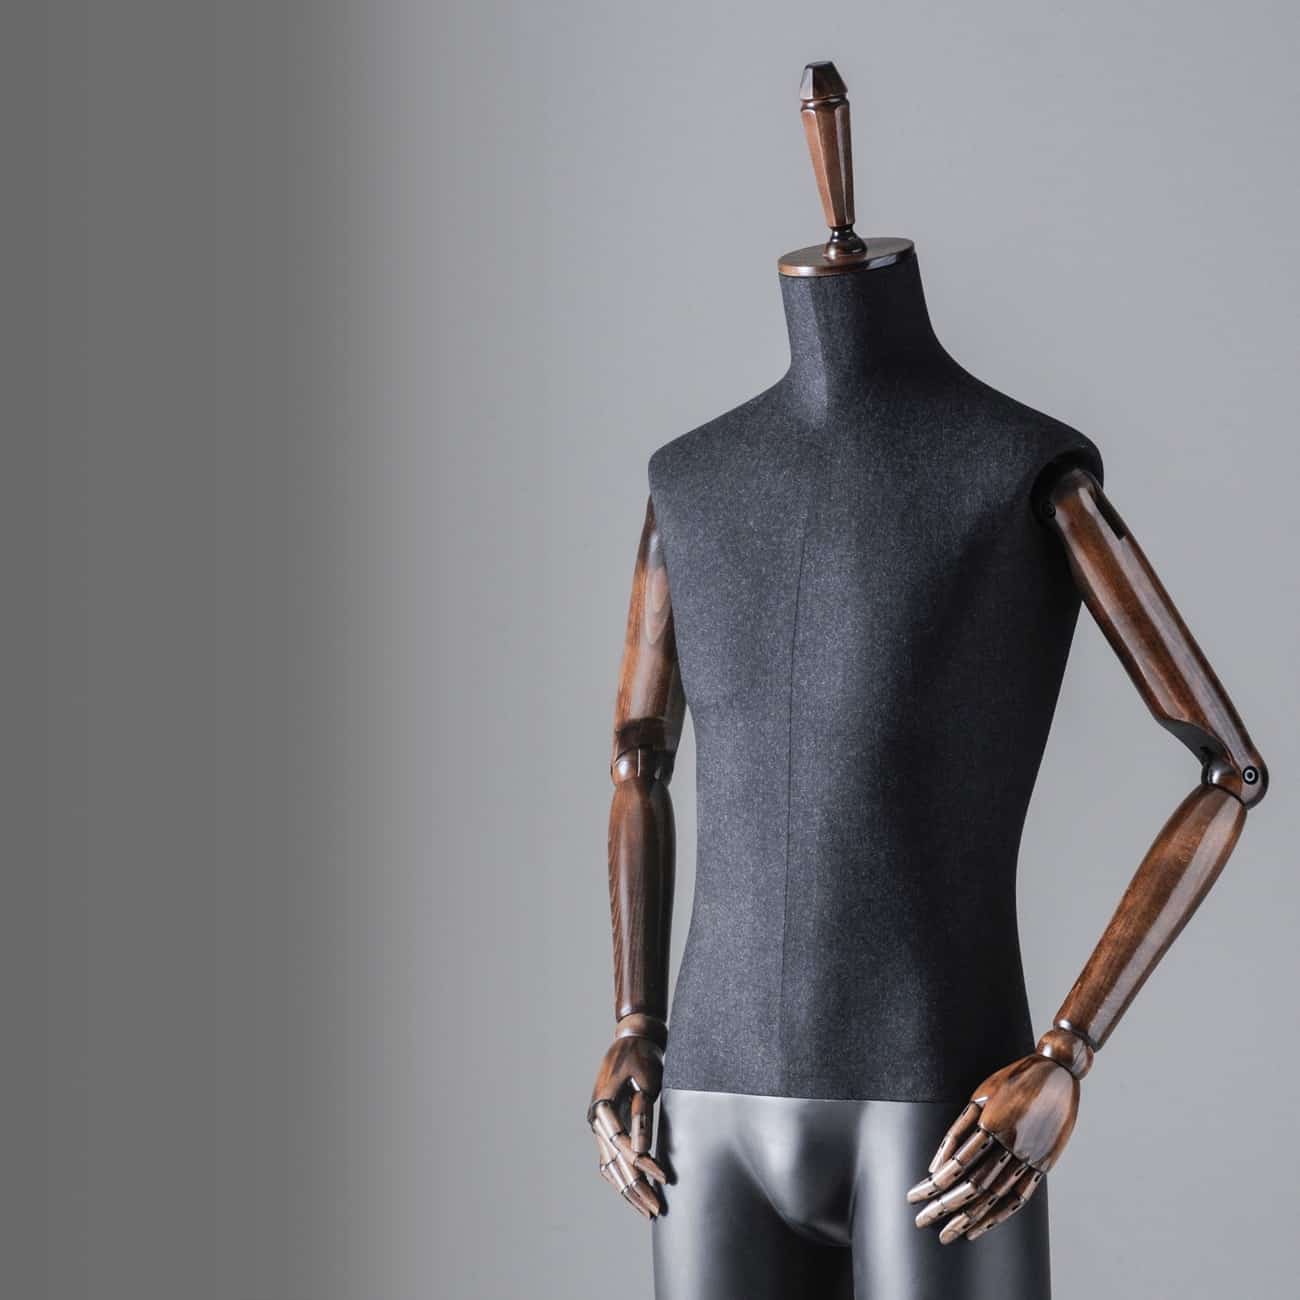 Sartorial Men | Headless male mannequin with fixed legs and articulated arms